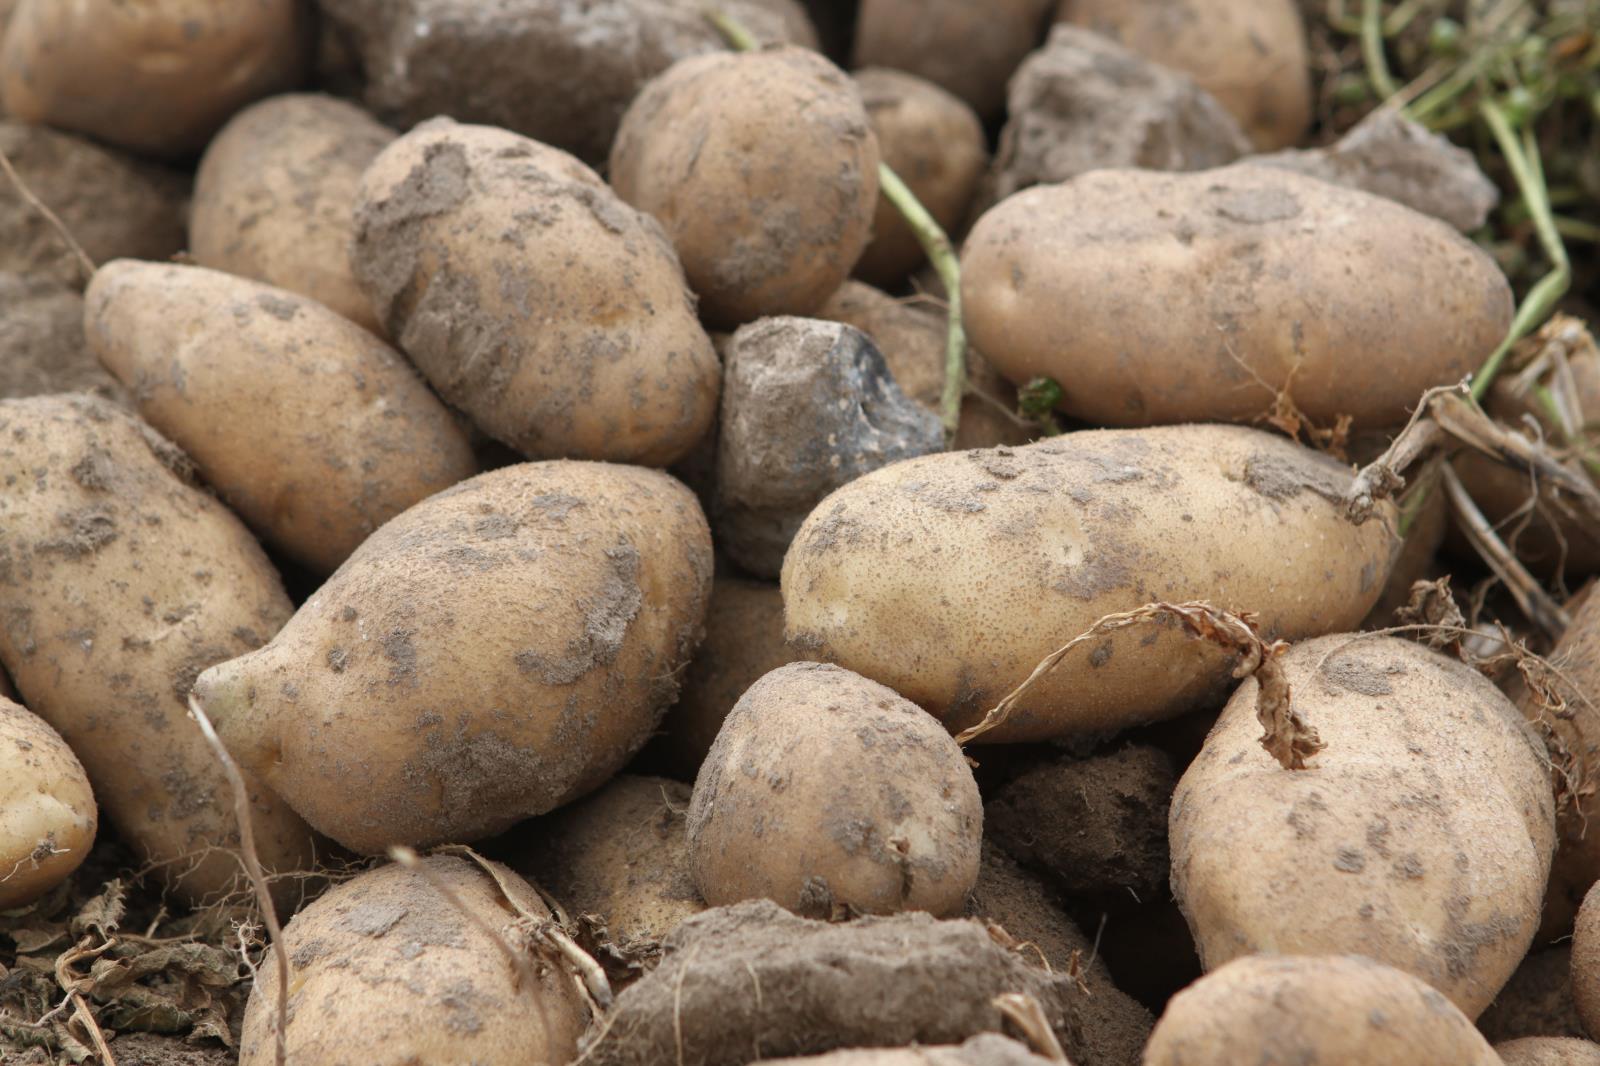 Idaho potato industry leaders expect the state’s 2019 spud crop to be smaller than last year, which could result in a strong marketing year for the state’s potato farmers.